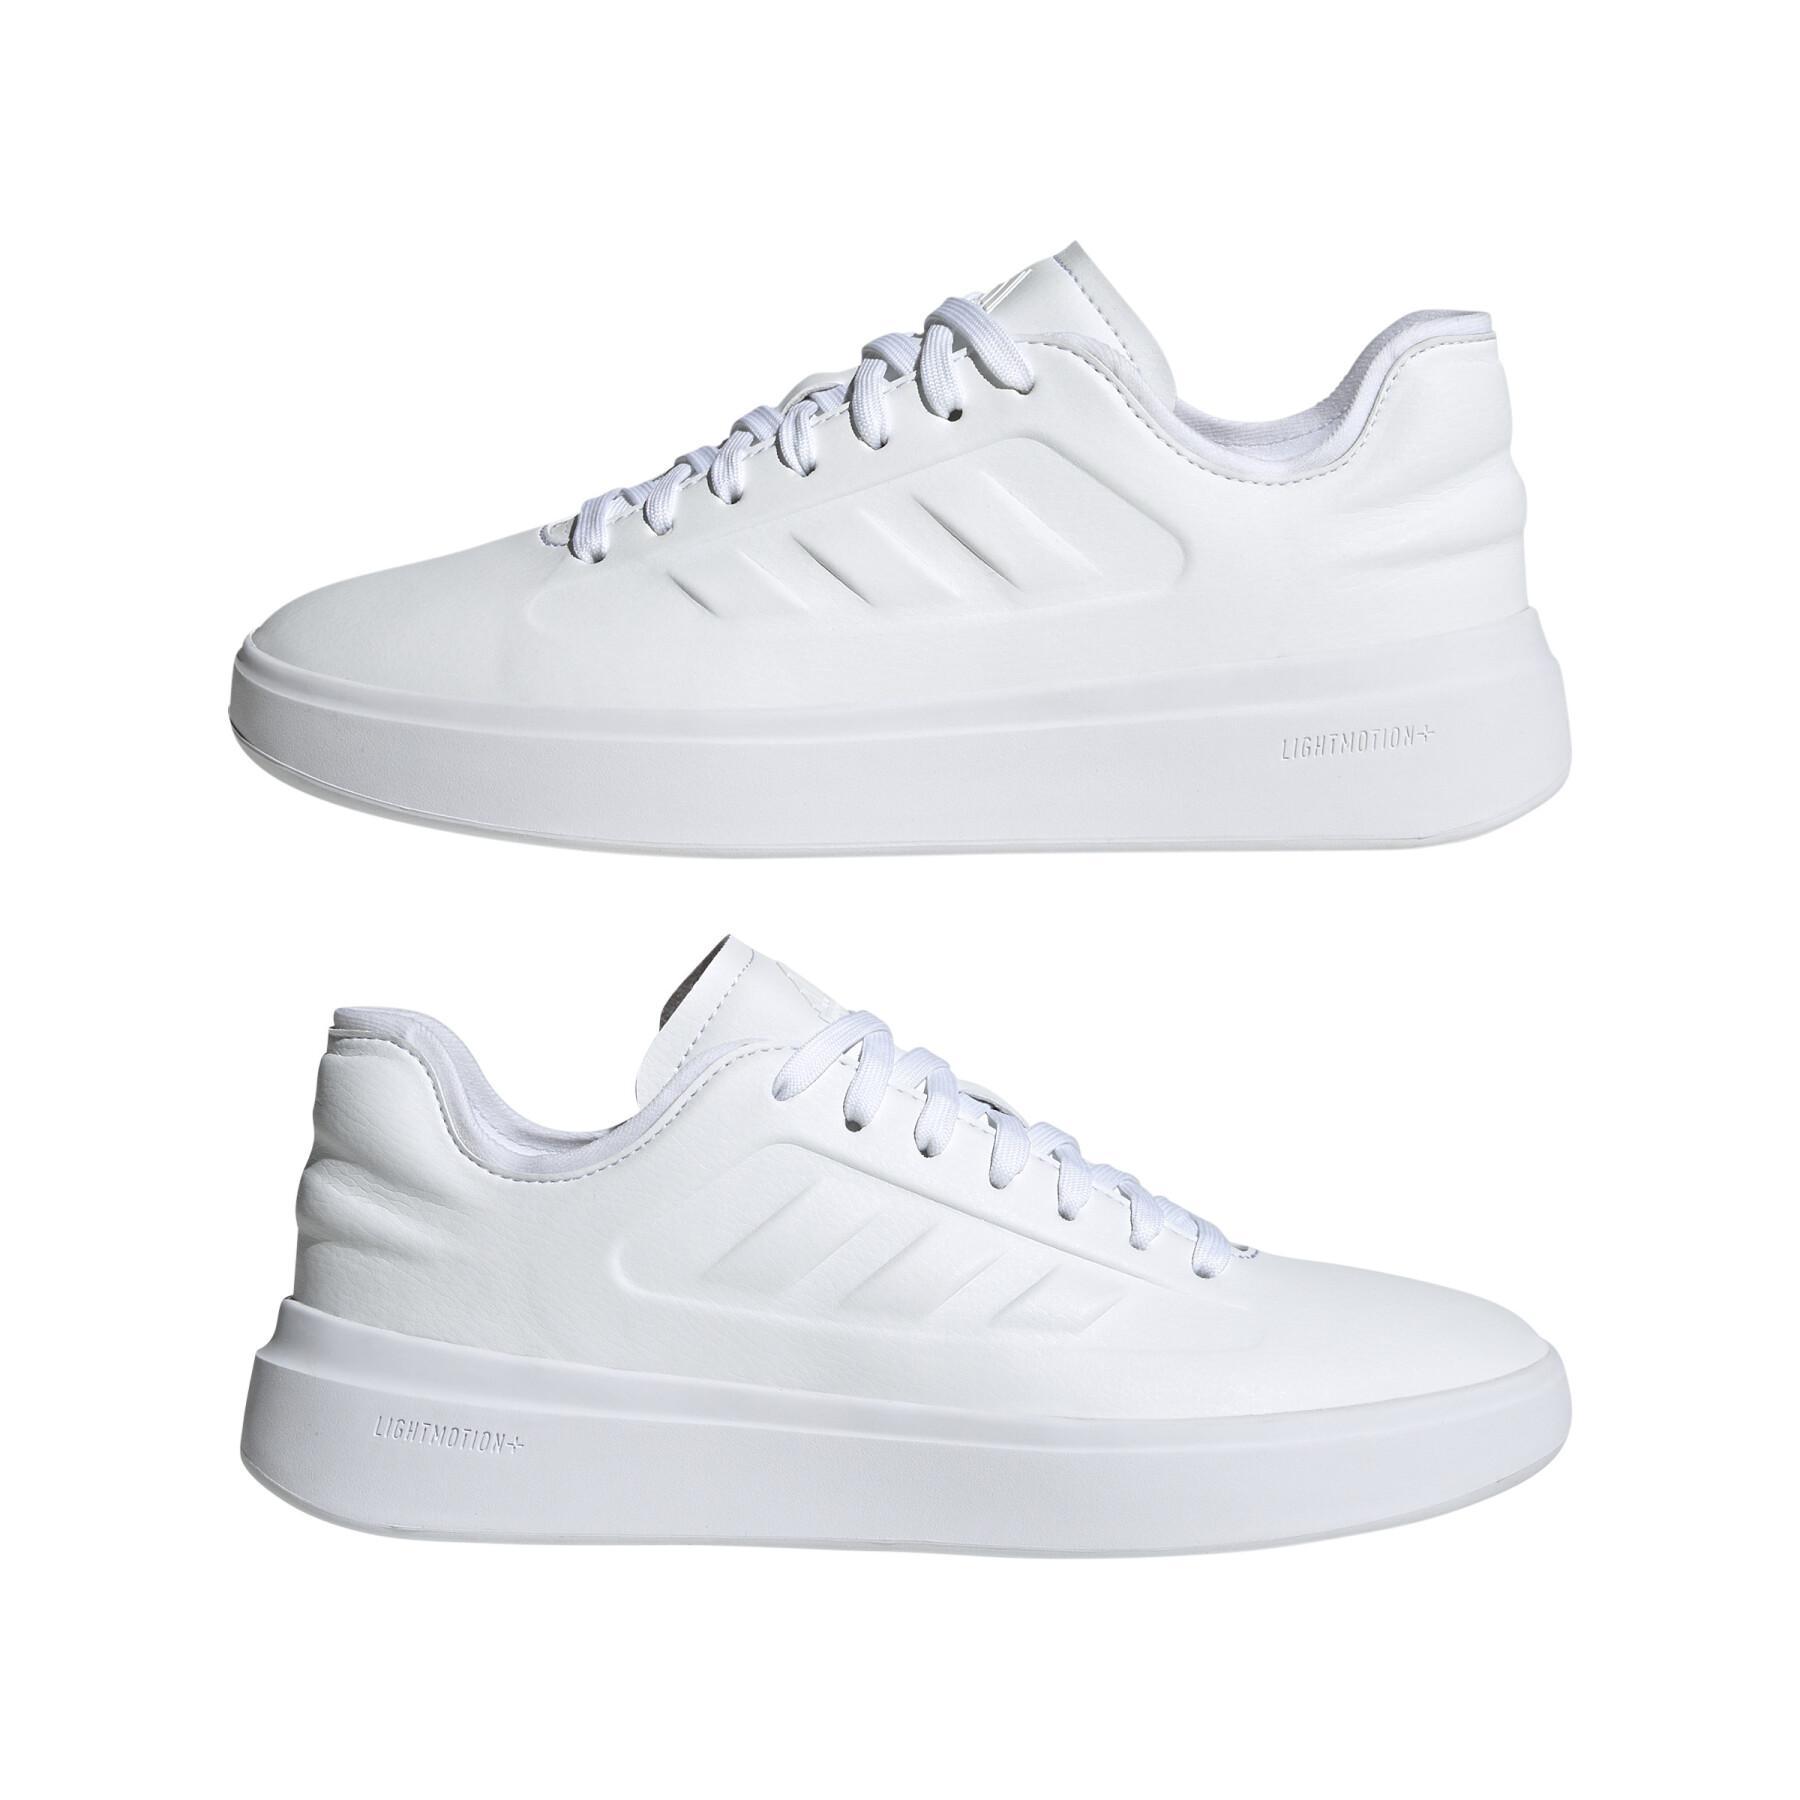 Chaussures de tennis femme adidas Zntasy Sportswear Capsule Collection